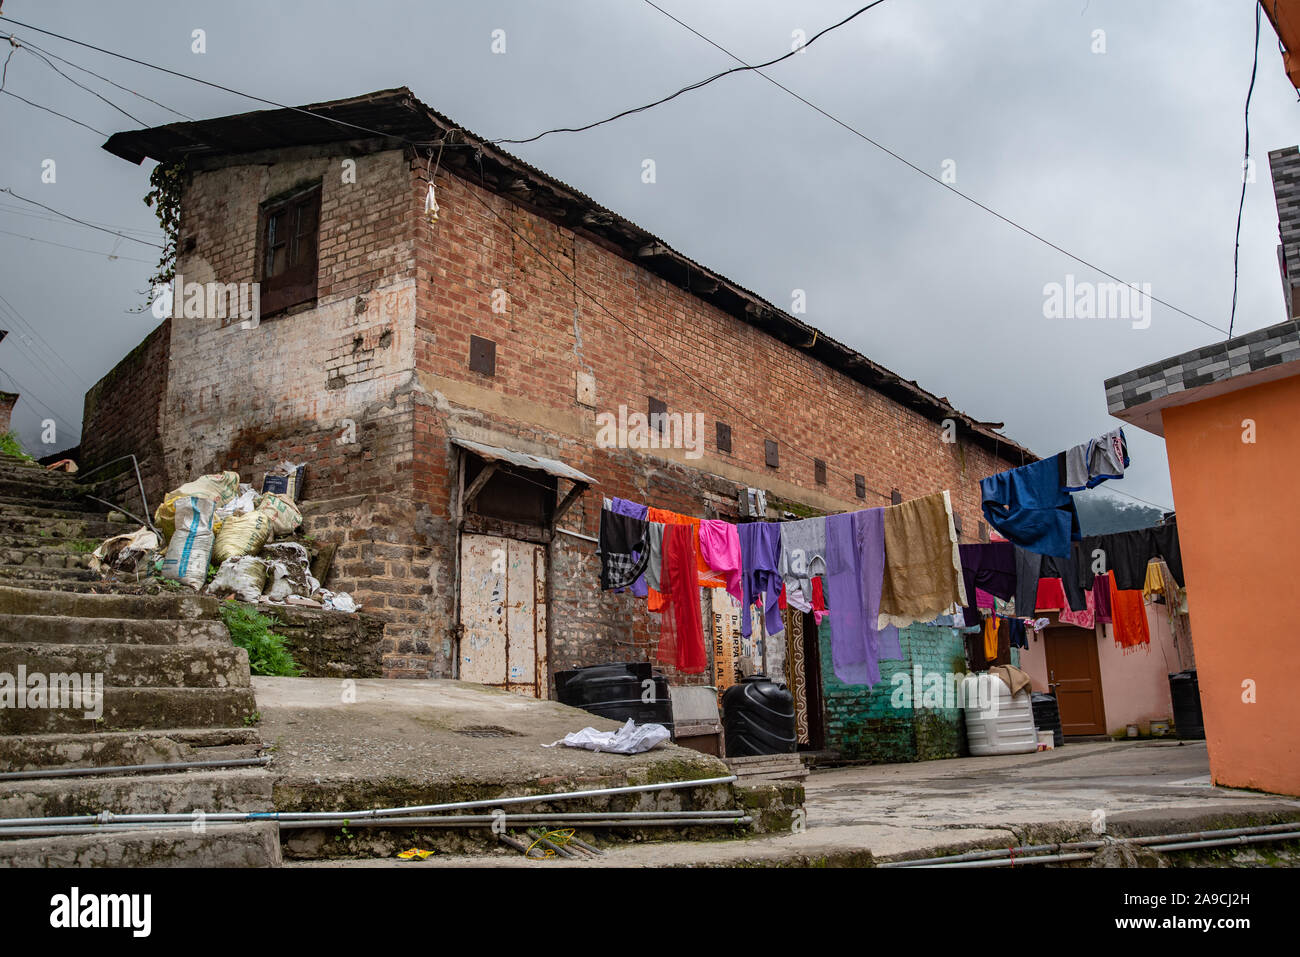 View of houses hugging the hillside in Shimla constructed close to each other. In the foreground clothes are being dried Stock Photo